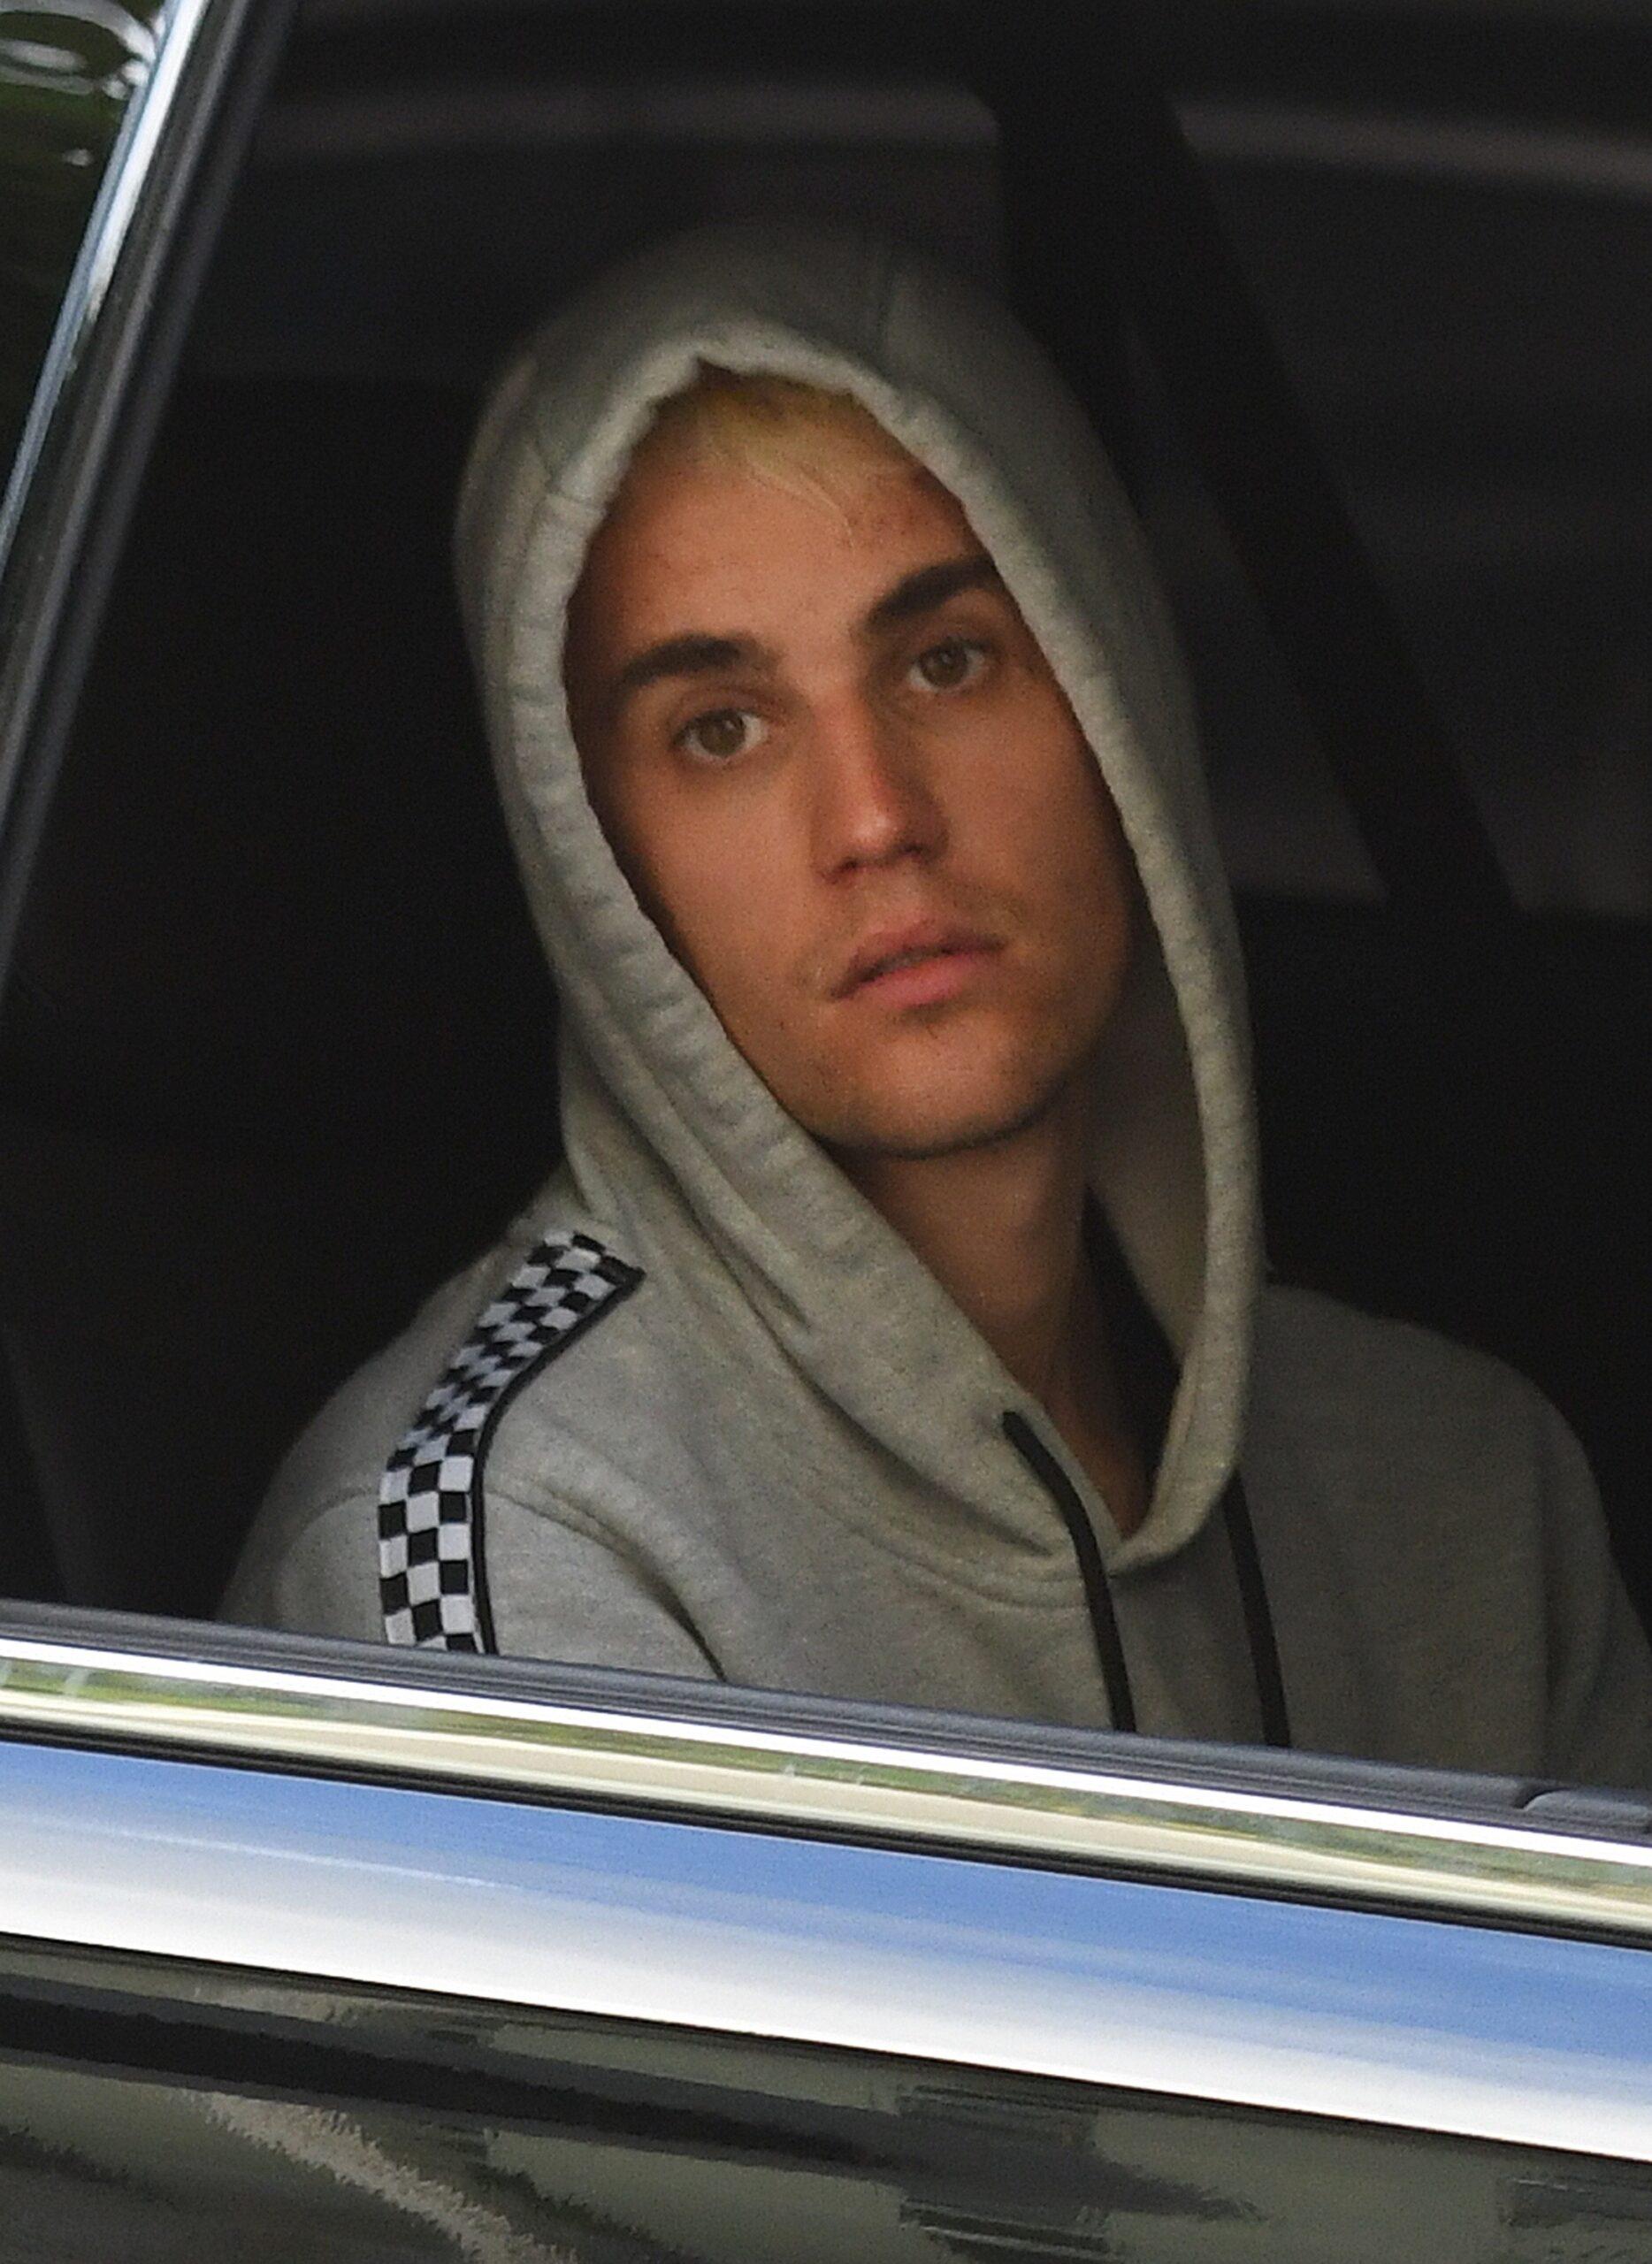 Justin Bieber looking tired in a car